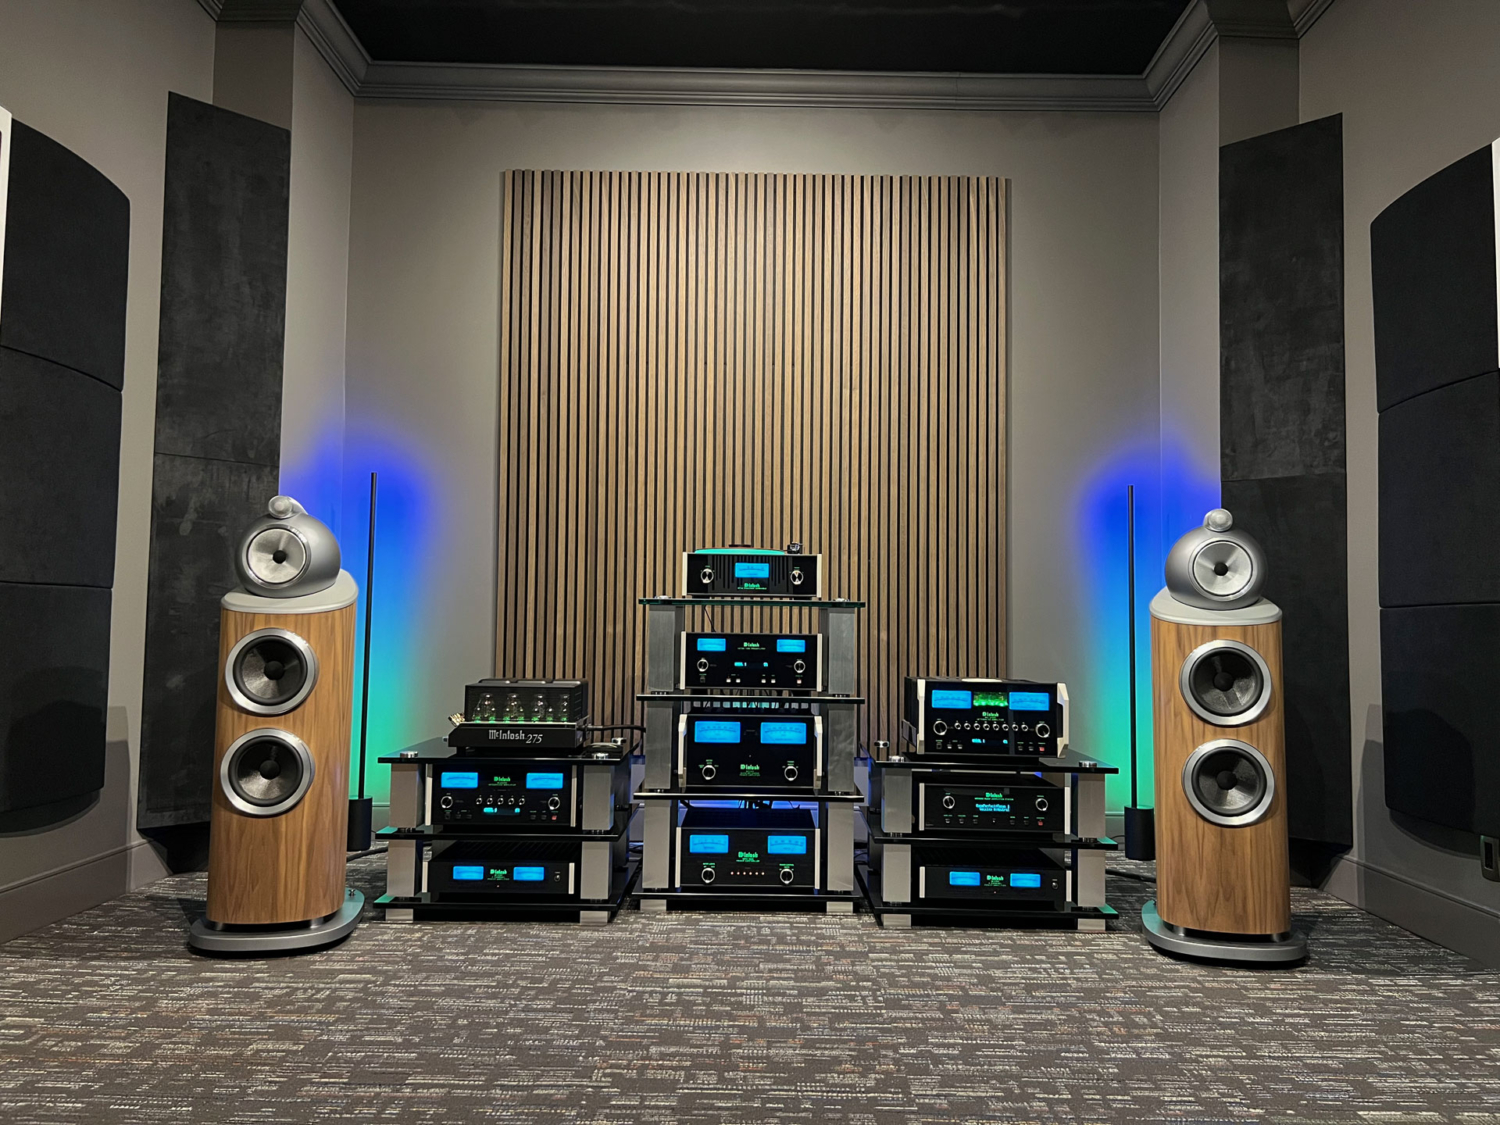 Home Electronics Products Hi-Fi Brands in Calgary, Alberta, featuring McIntosh speakers.